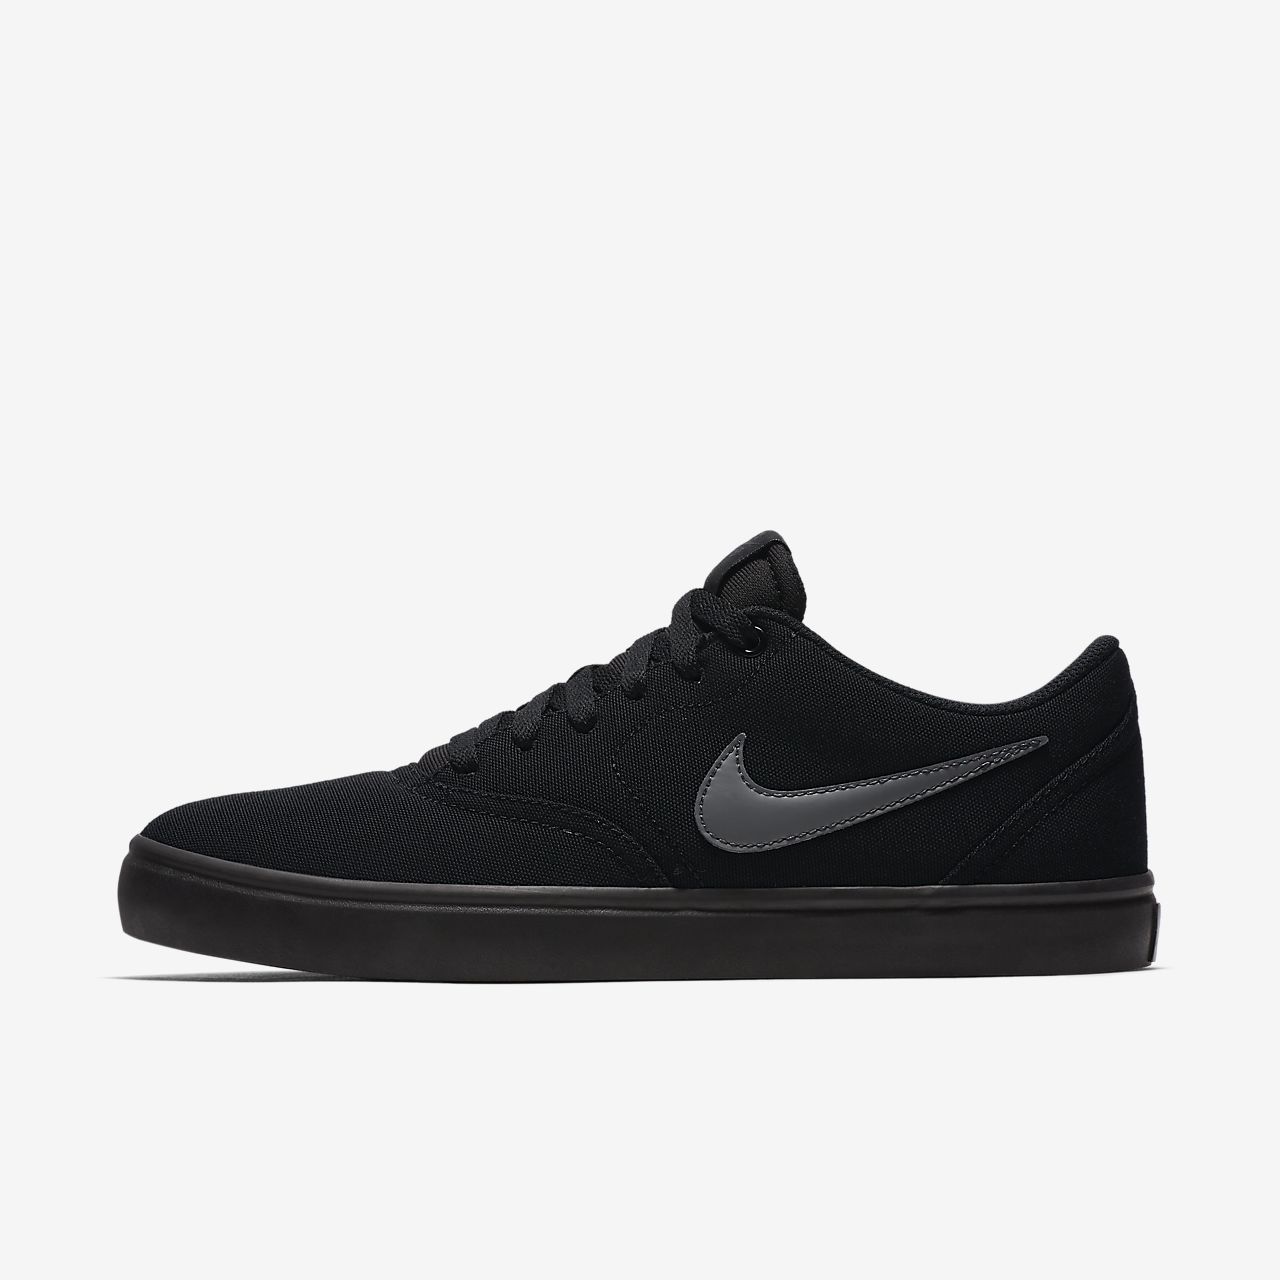 Ouille! 11+ Listes de Nike Sb Check Solarsoft? Choose from a great ...